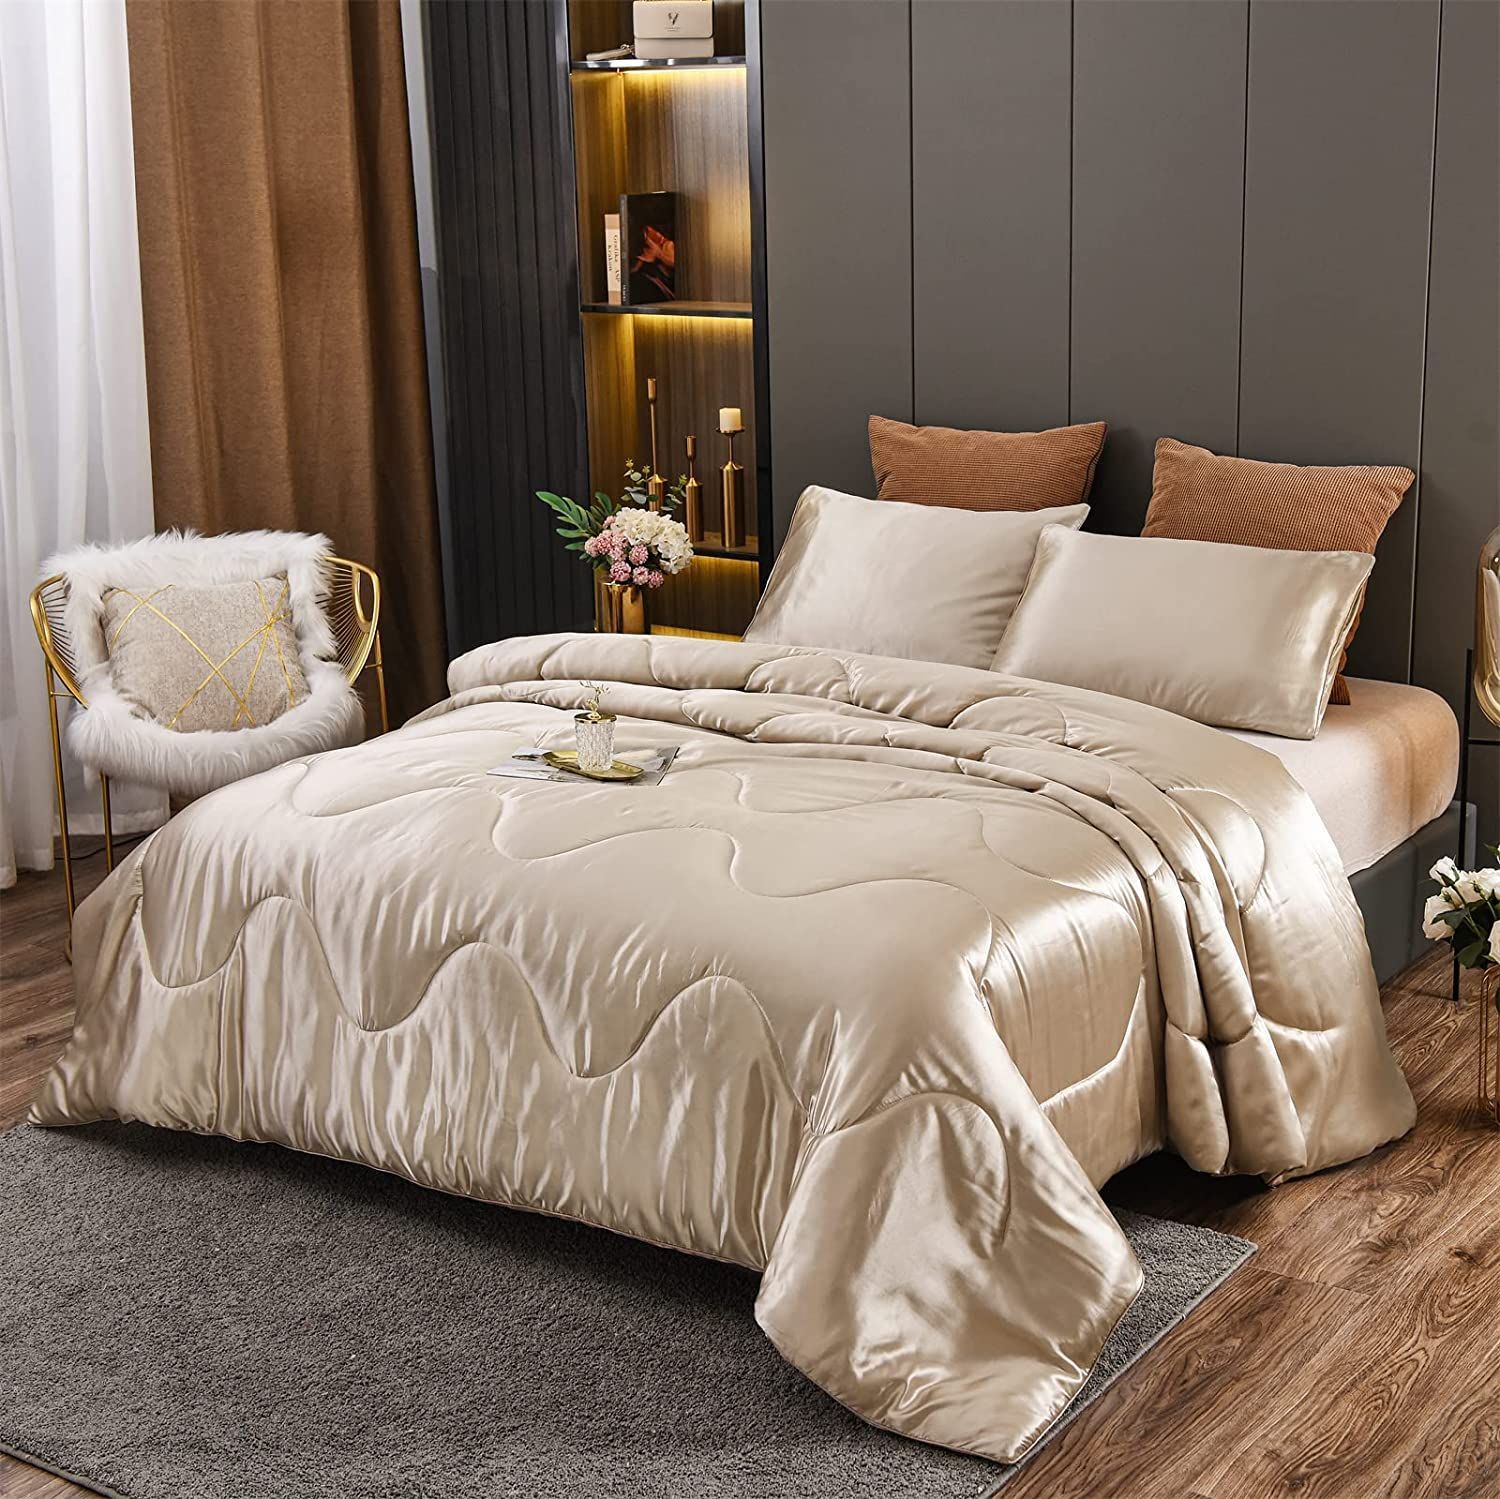 & Cushions available separately Luxury Bedding Bedspreads Range of Duvet Sets 